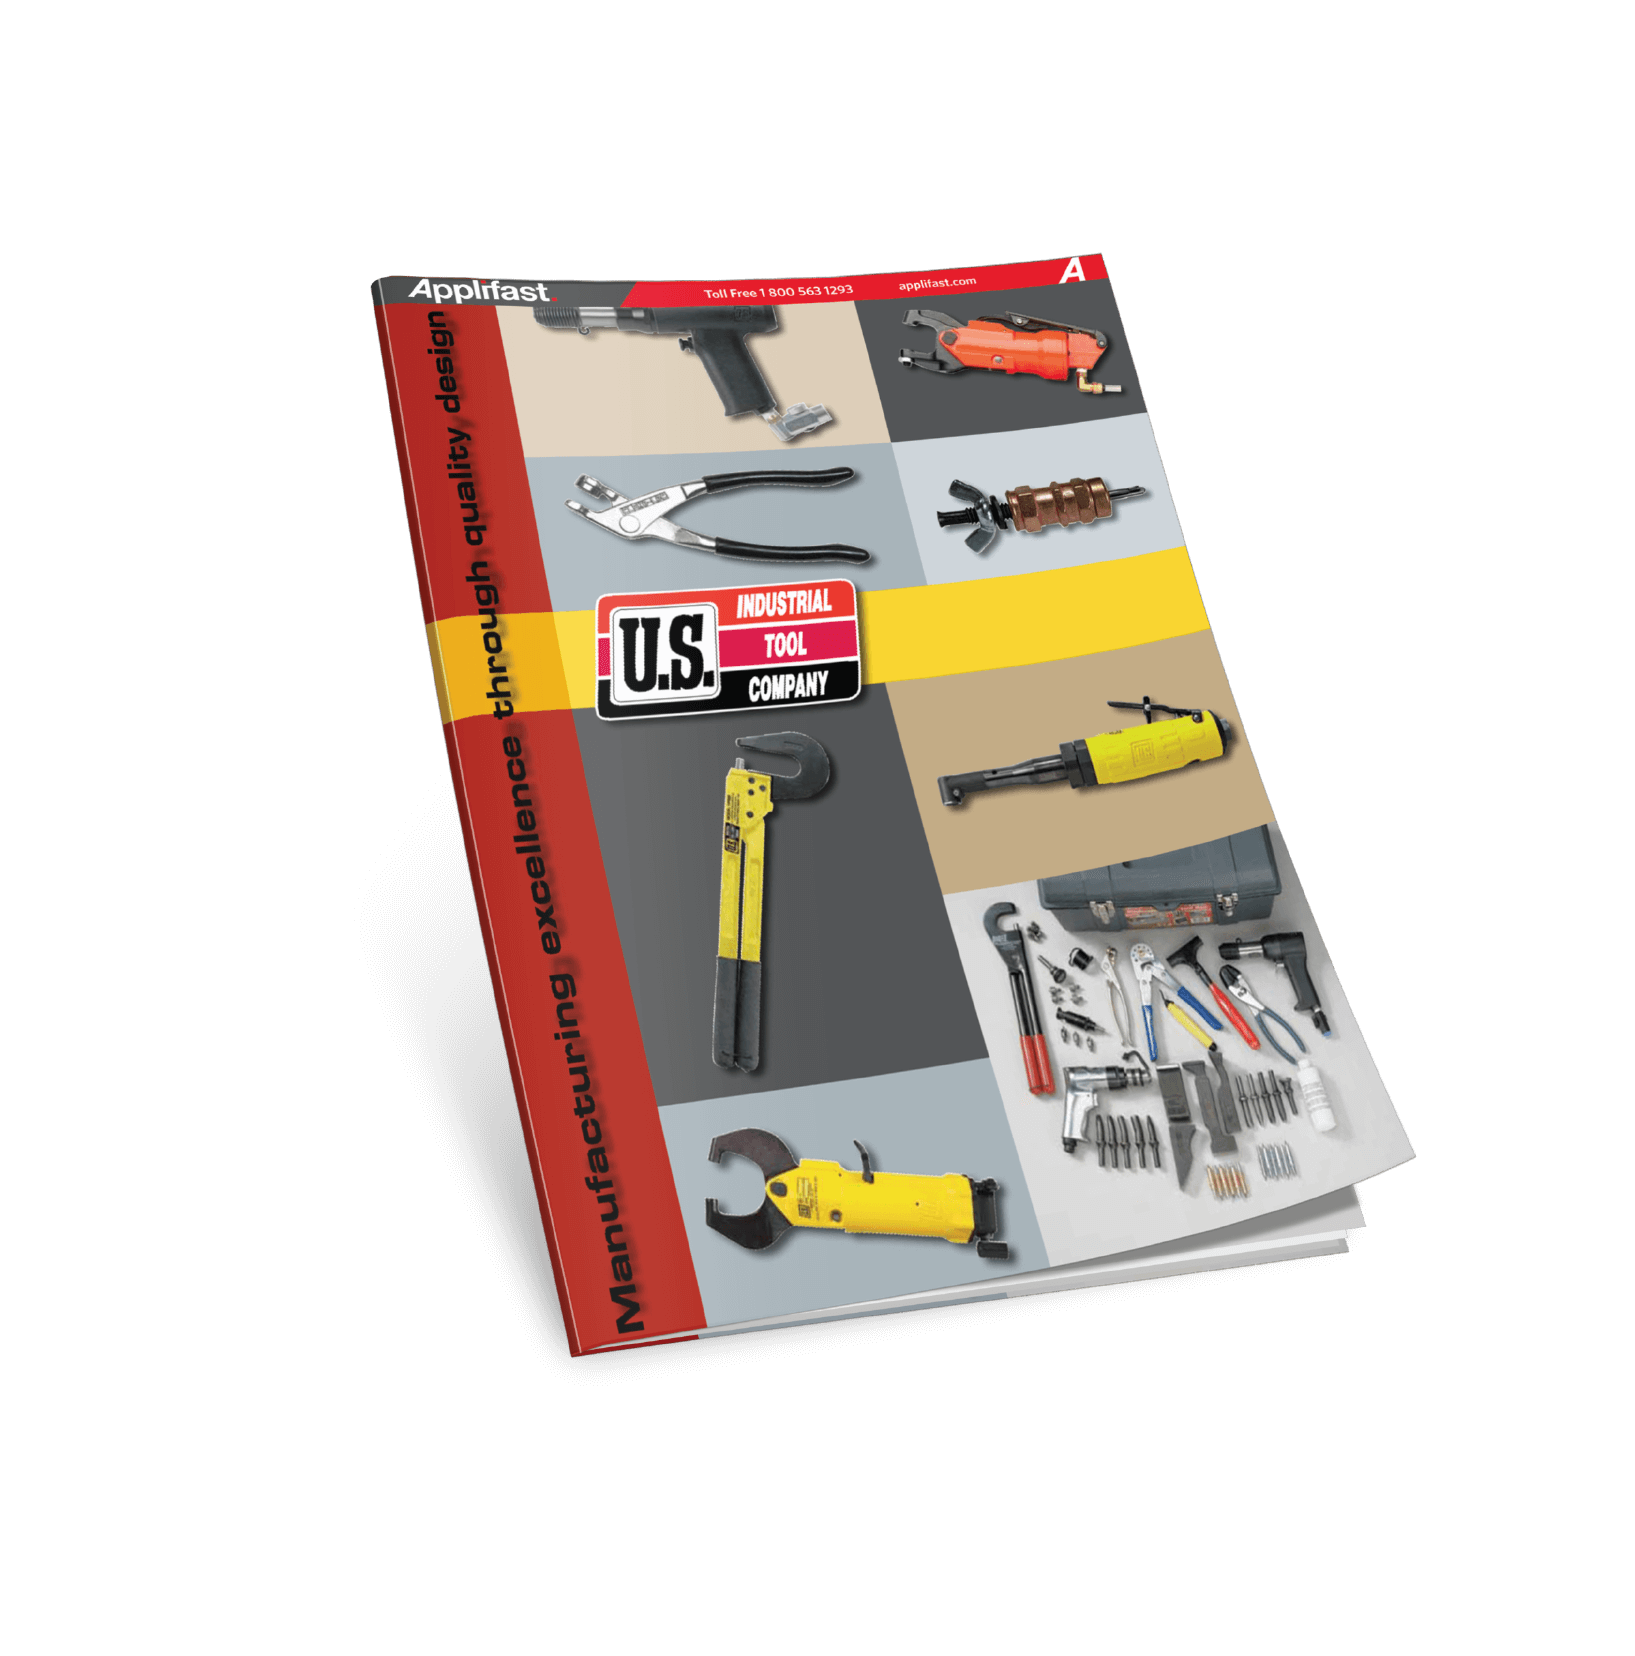 APPLIFAST - U.S. INDUSTRIAL TOOL COMPANY CATALOGUE